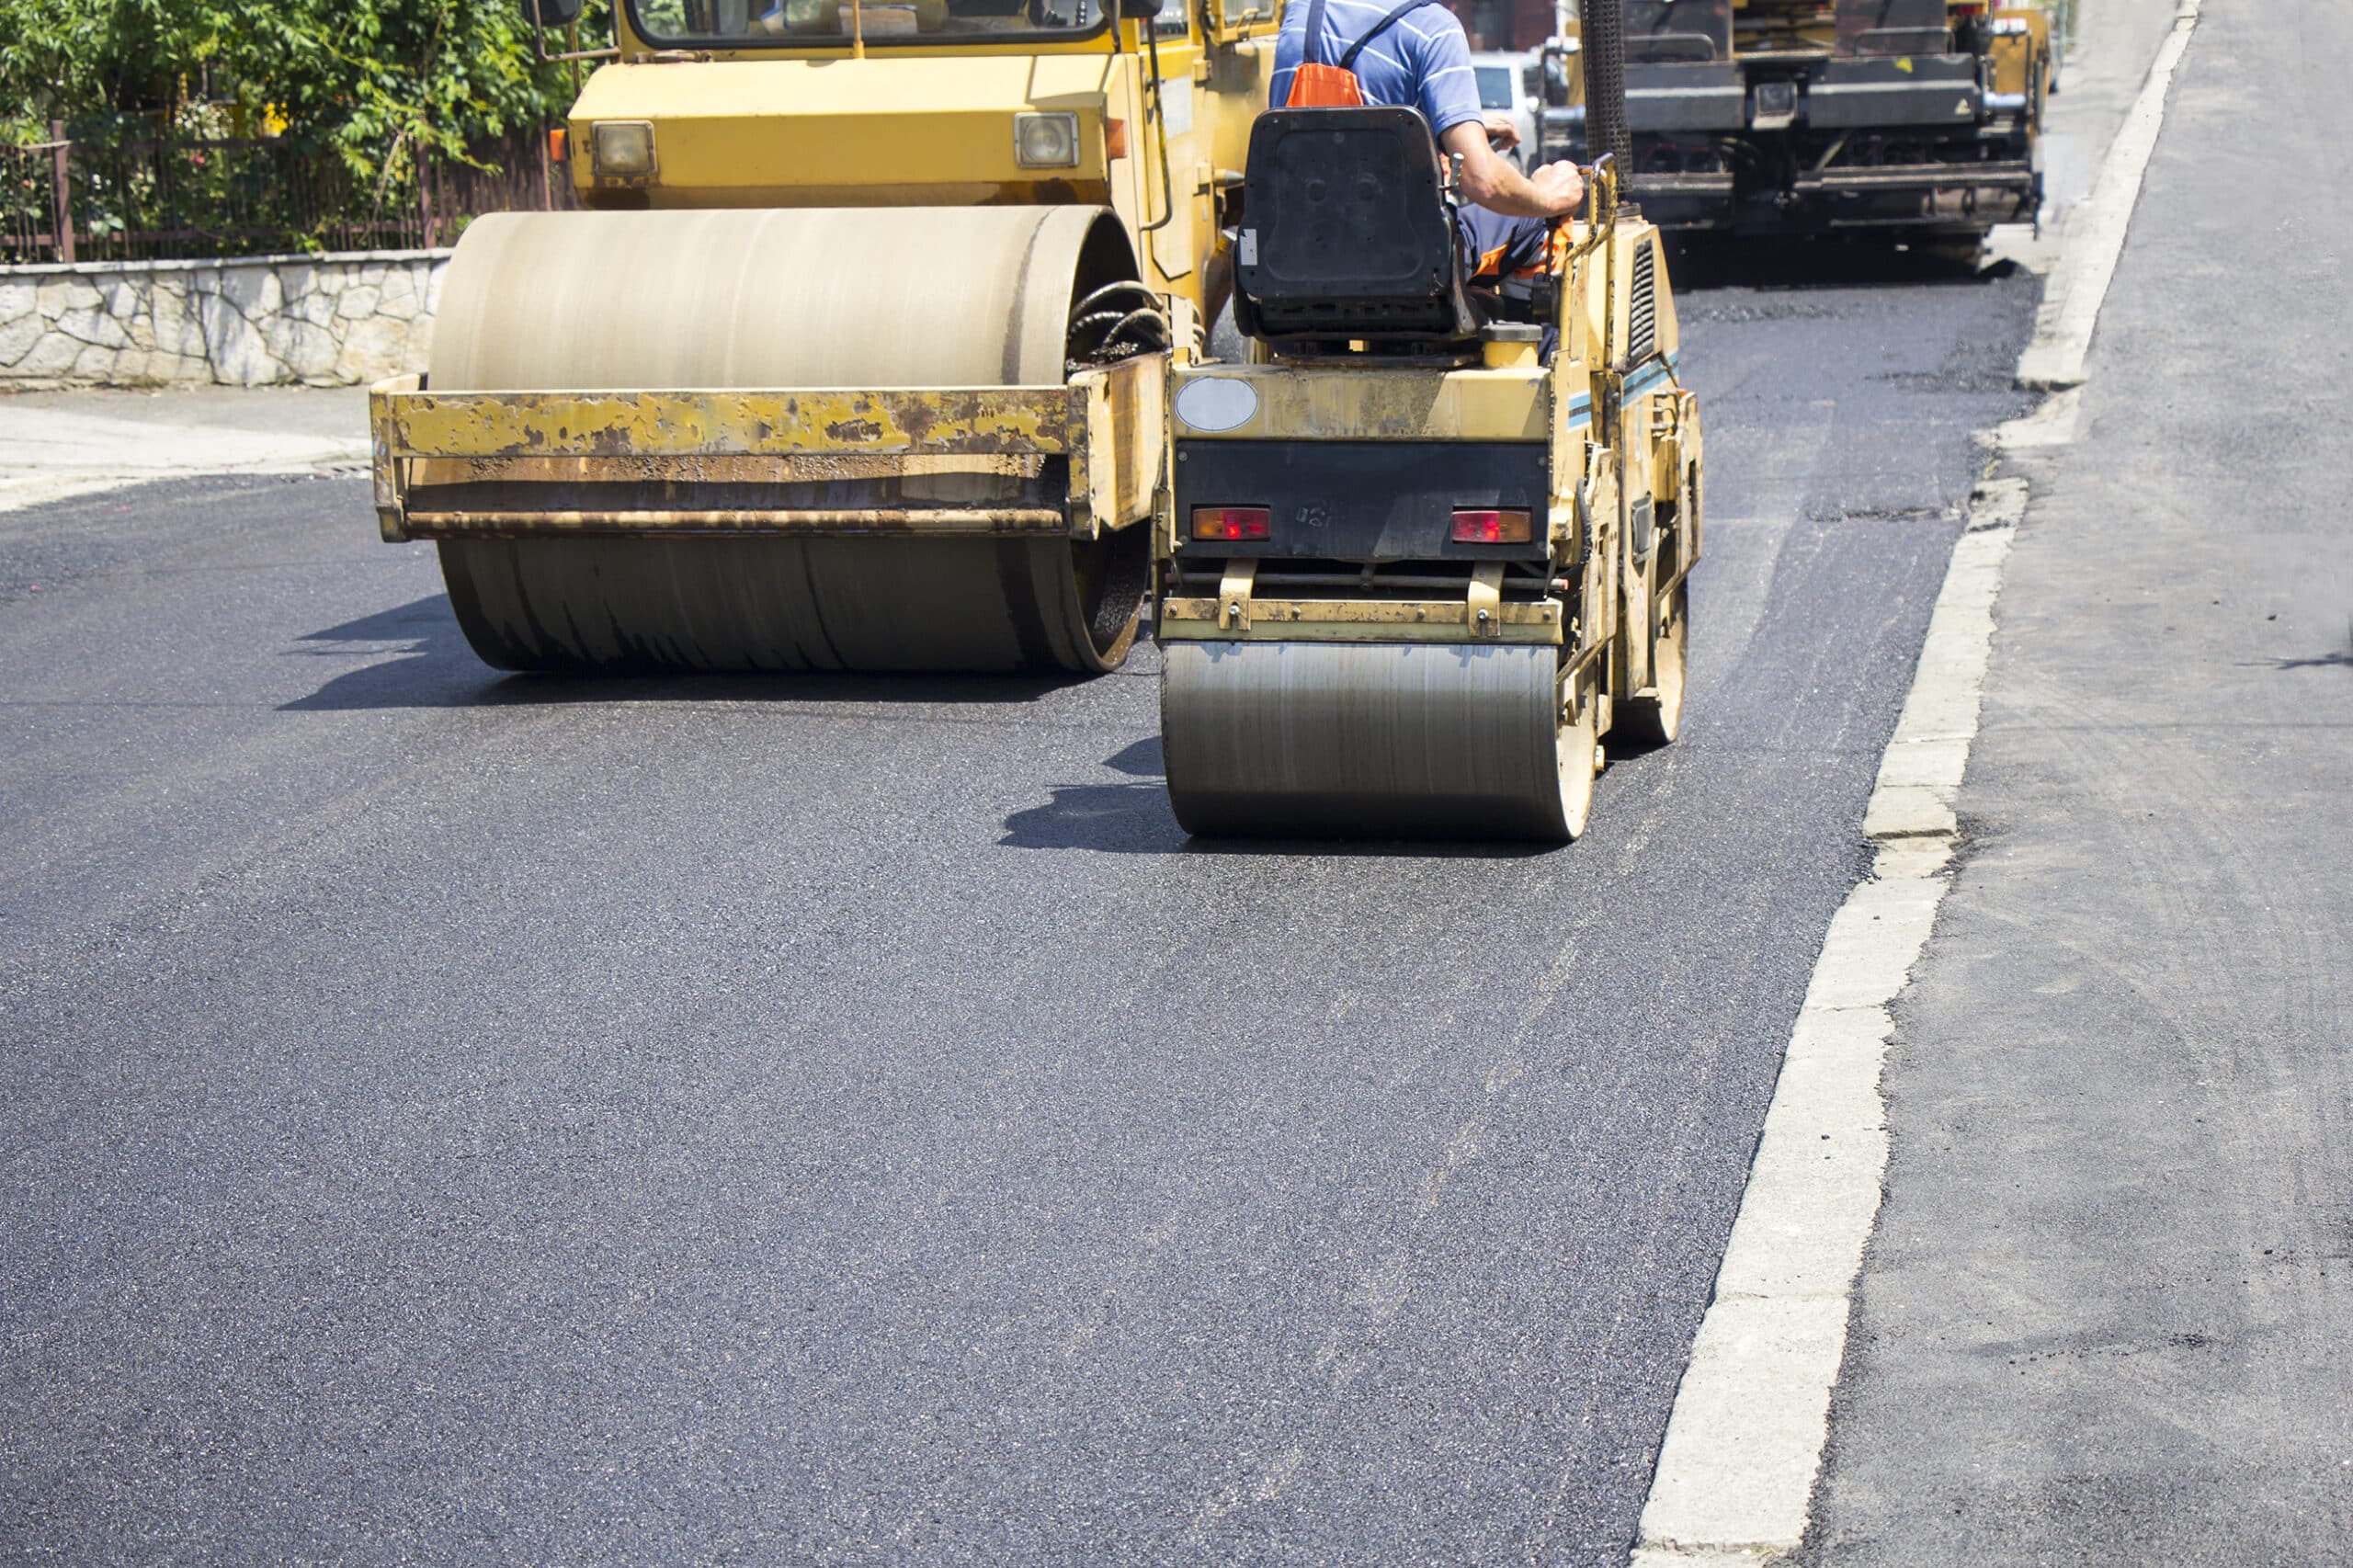 Compactor roller during road construction at asphalting work